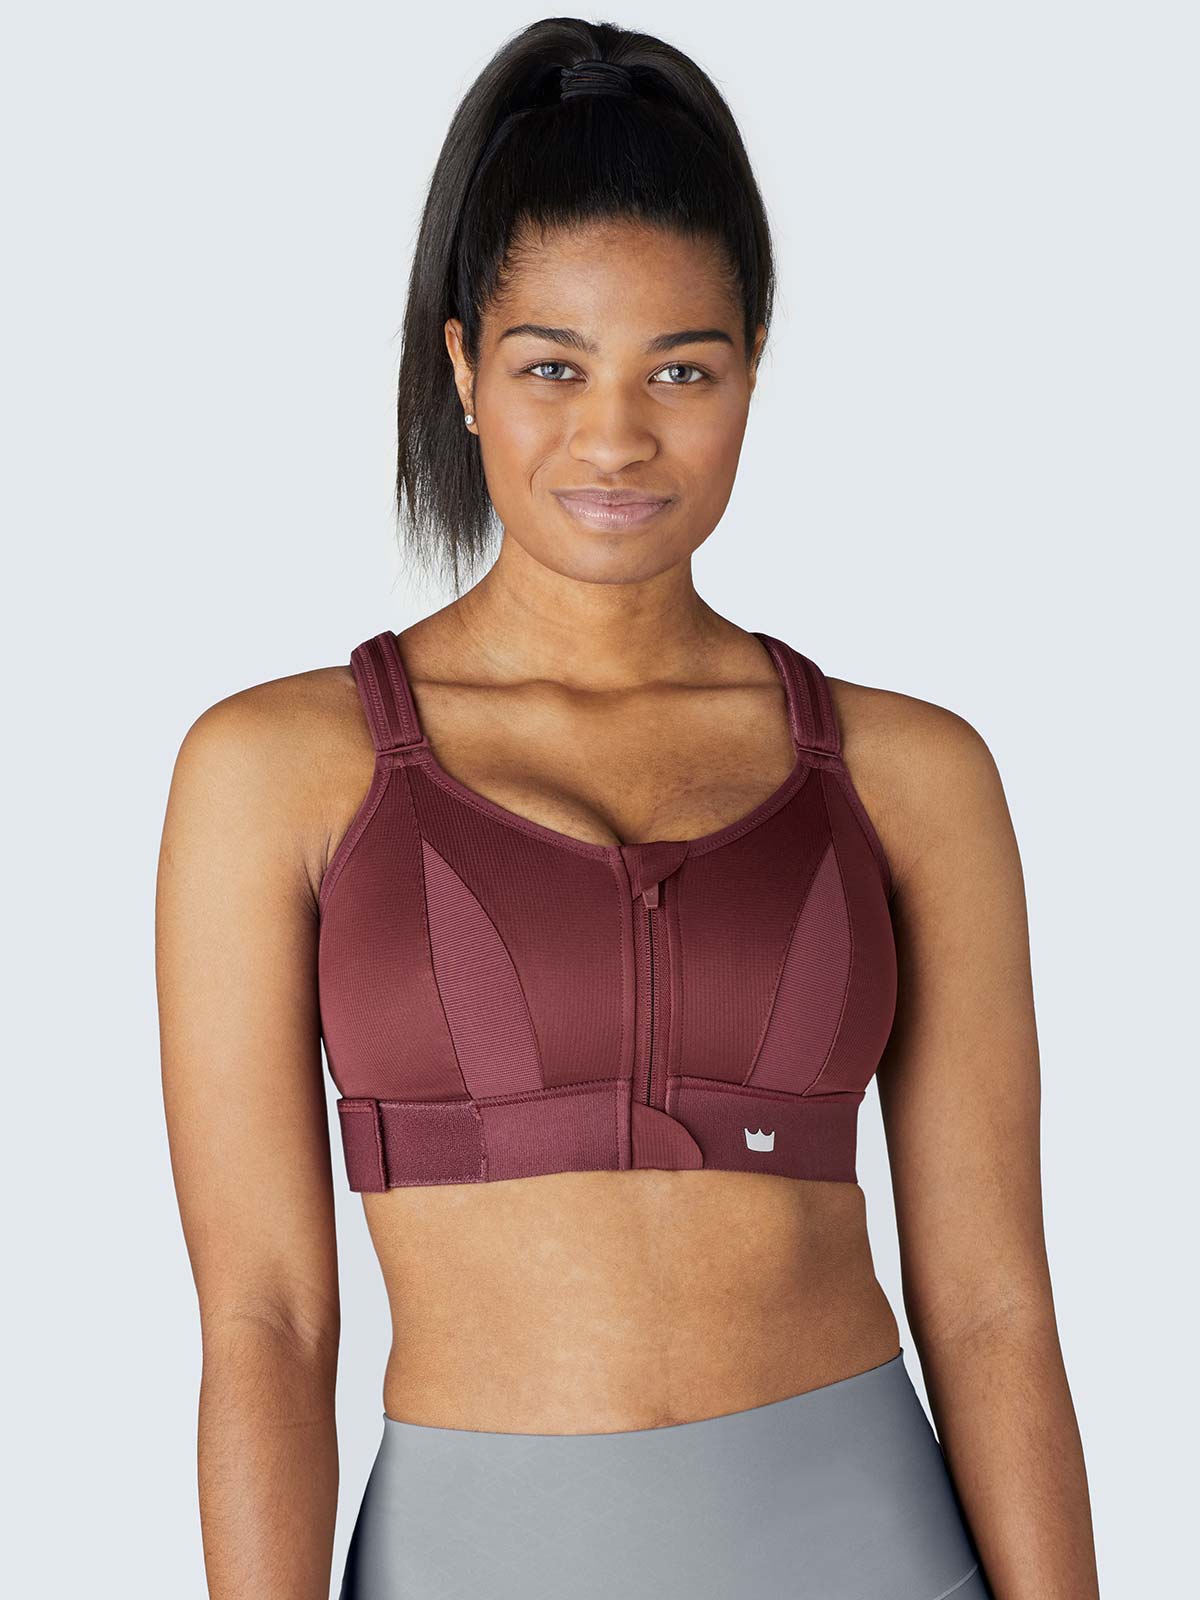 SHEFIT High Impact Ultimate Sports Bra Size3 4Luxe Black Size undefined -  $55 - From Ava